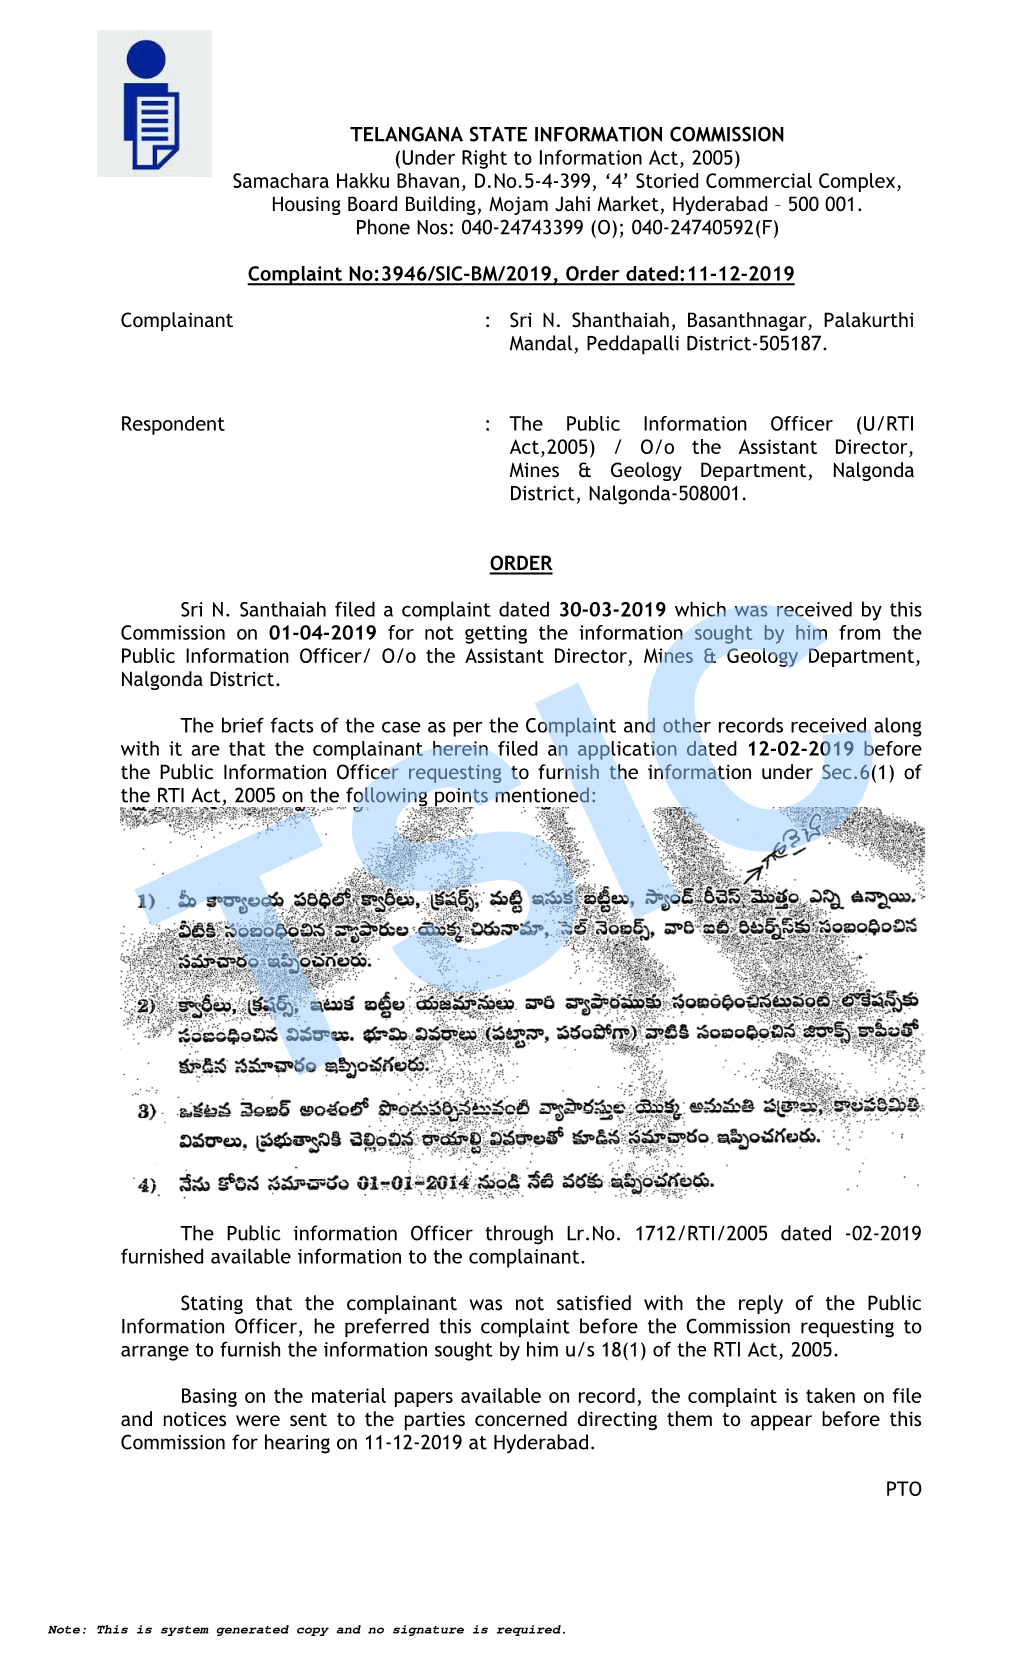 TELANGANA STATE INFORMATION COMMISSION (Under Right To